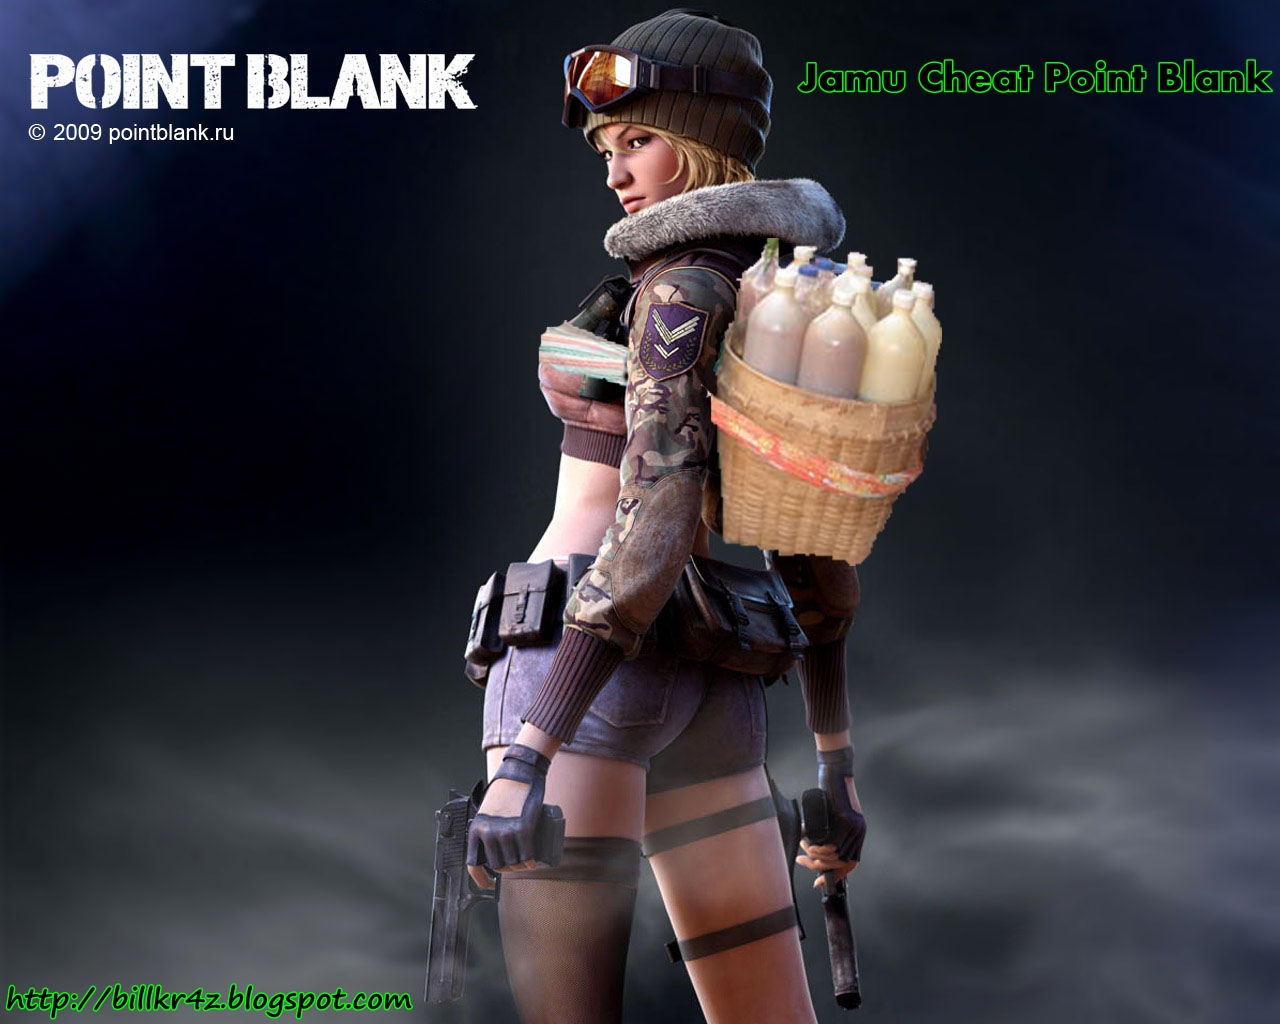 Download Cheat Cash Point Blank 2011 W-2